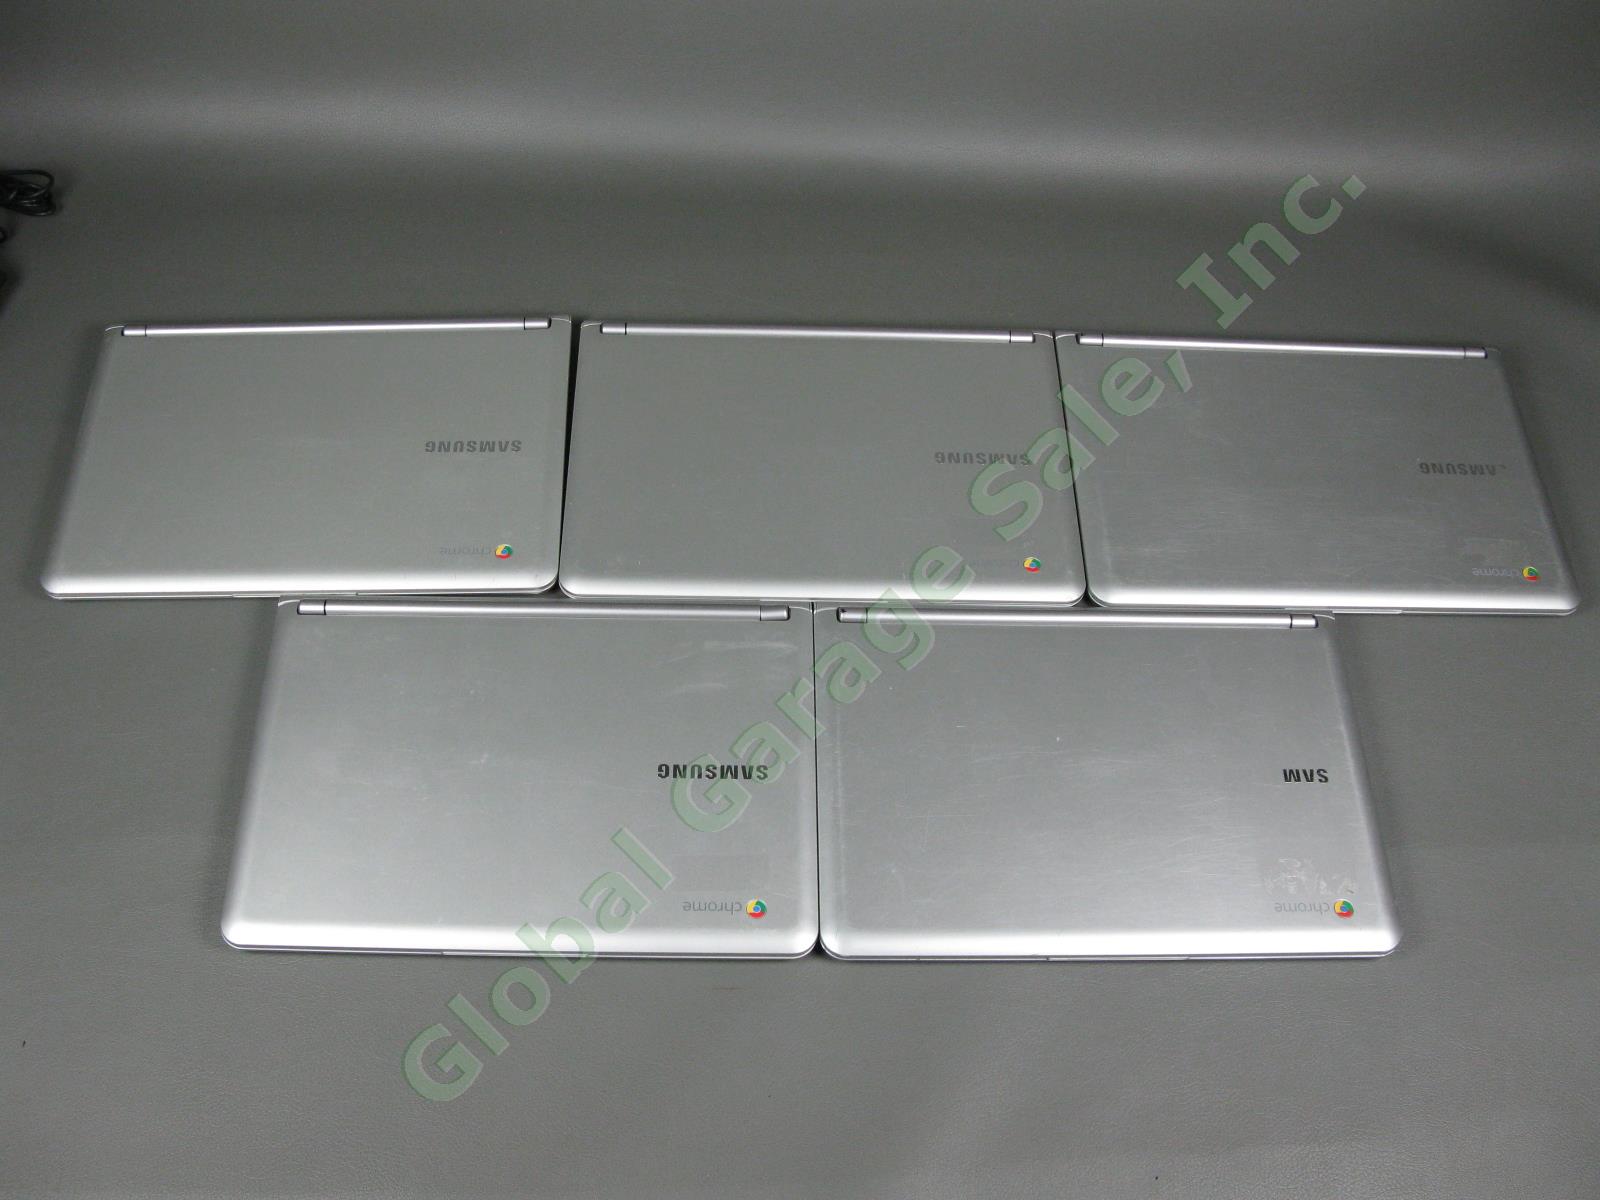 Lot of 5 Samsung Chromebook 303C Laptop Computers Lot 11.6" 1.7GHz 2GB 16GB NR 1